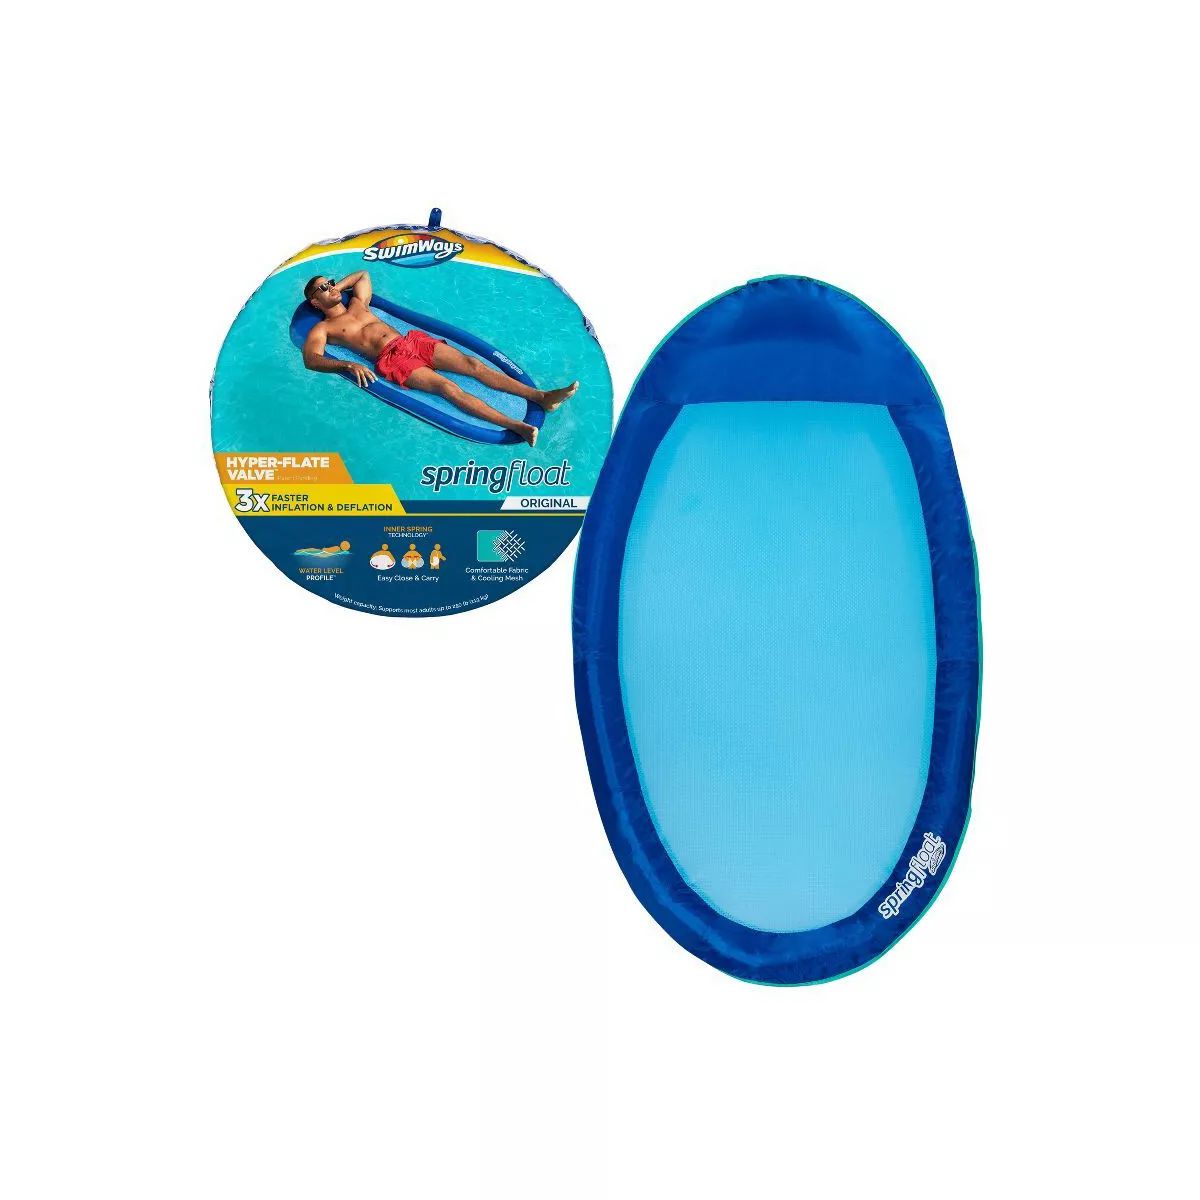 SwimWays Spring Float Inflatable Pool Lounger with Hyper-Flate Valve Blue | Target